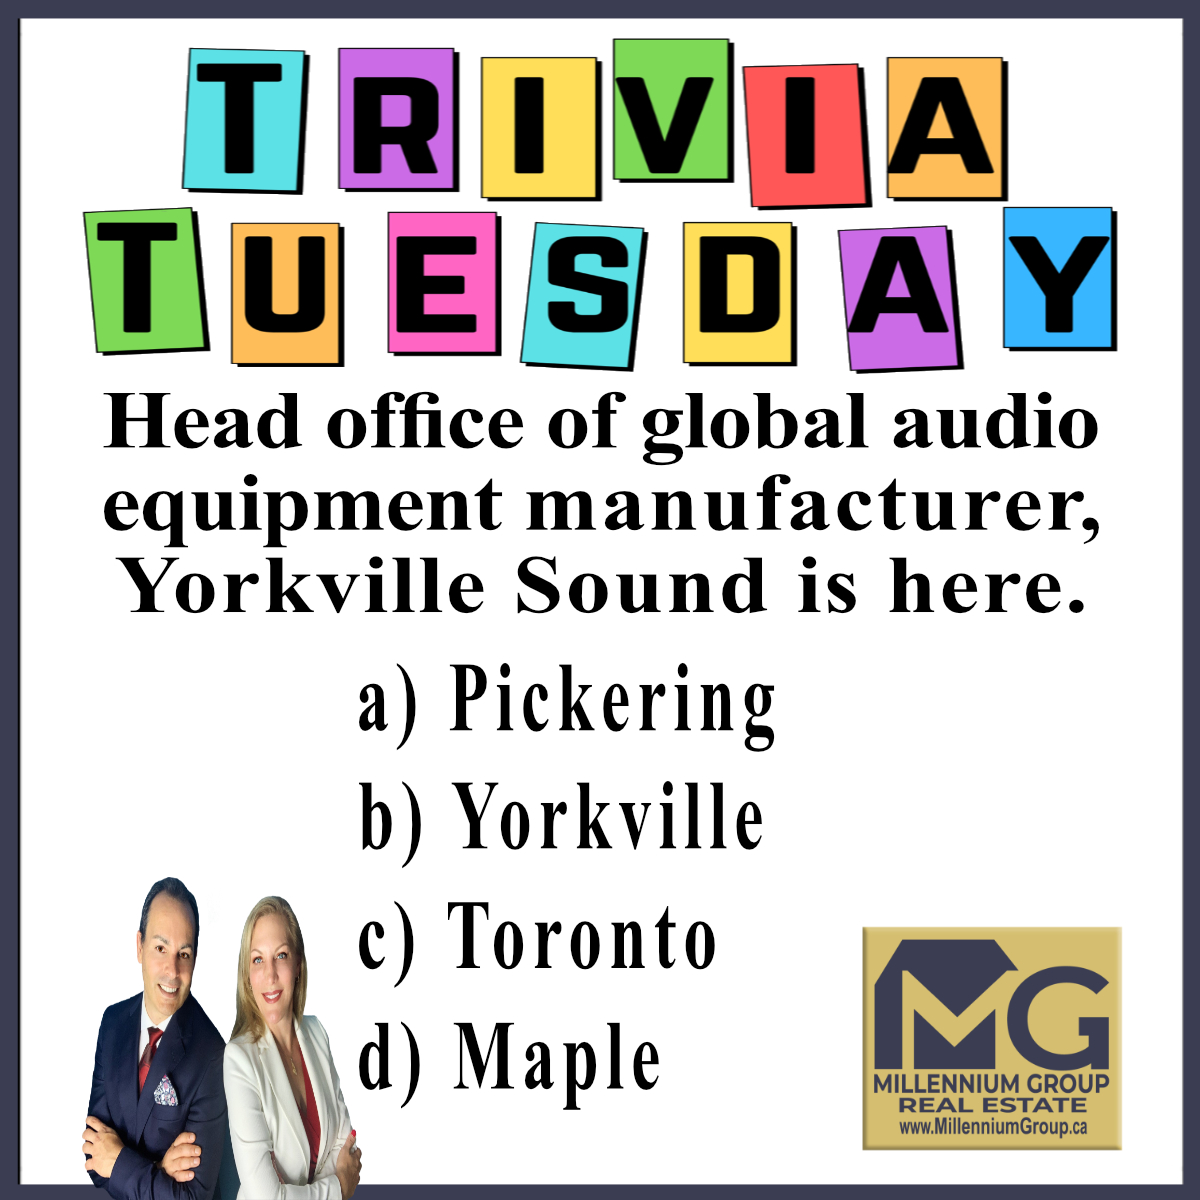 Every Canadian musician should know the answer to this question 🎶

#TuesdayTrivia #TriviaTuesday #MusicTrivia #OntarioTrivia #KendraCutroneBroker #TonyCutroneRealtor #MillenniumGroupRealEstate #FREEHomeEvaluation #FREEHomeStaging #FixAndFlipExpert #WeSellForMore #TonySellsGTA